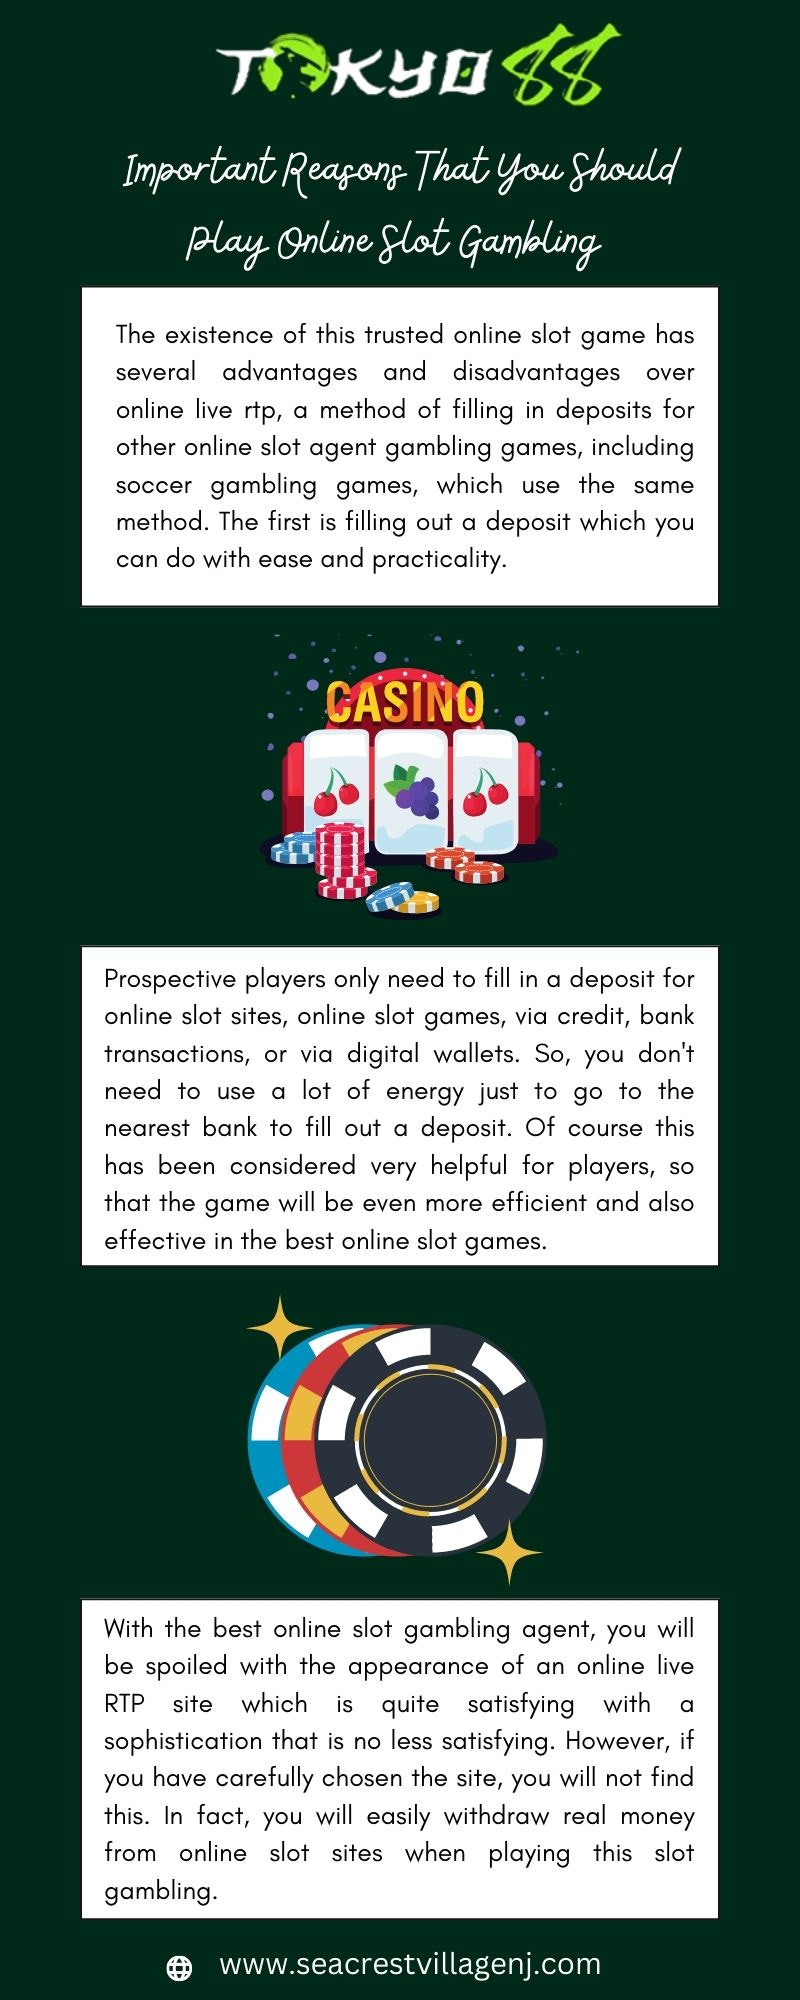 Important Reasons That You Should Play Online Slot Gambling